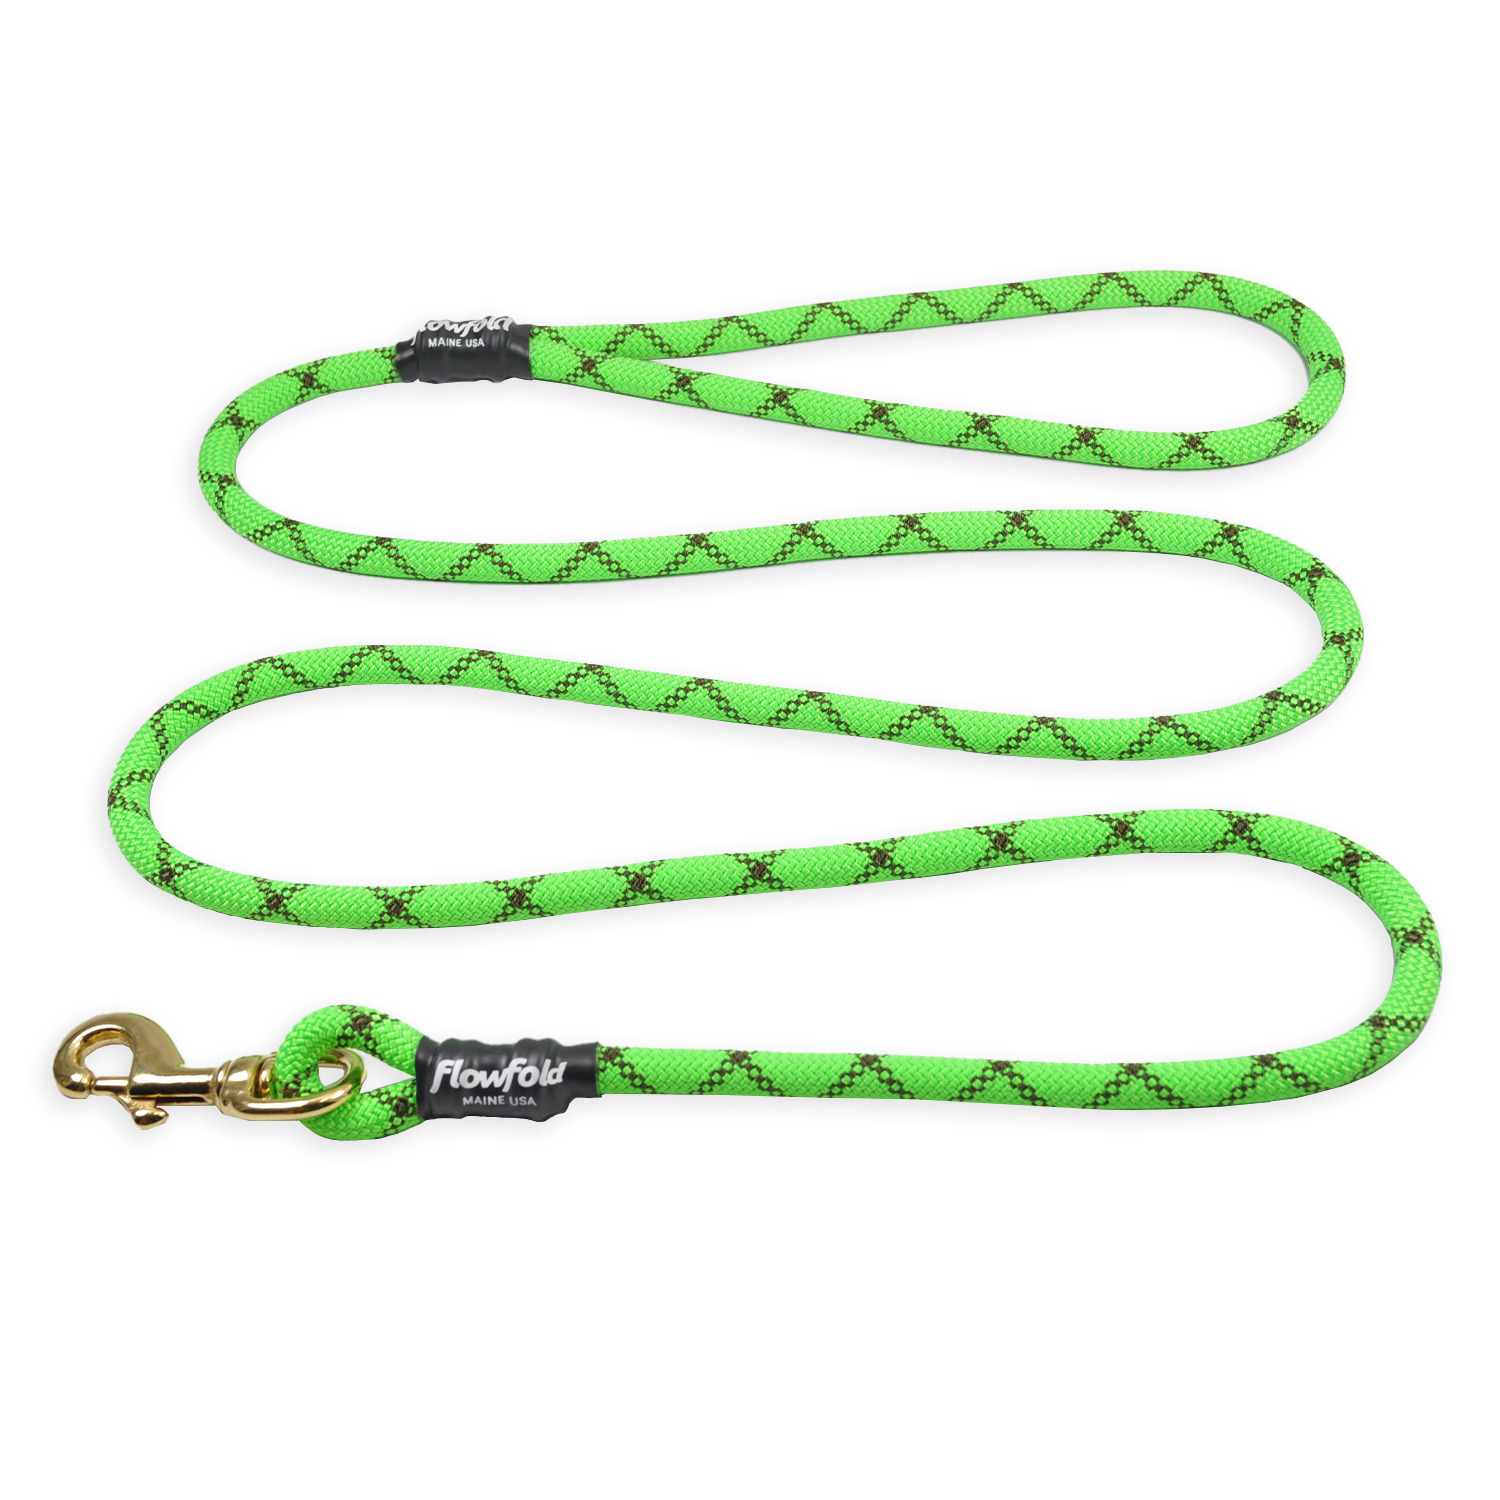 Flowfold Green Trailmate Recycled Climbing Rope Dog Leash 6 Feet Made in USA